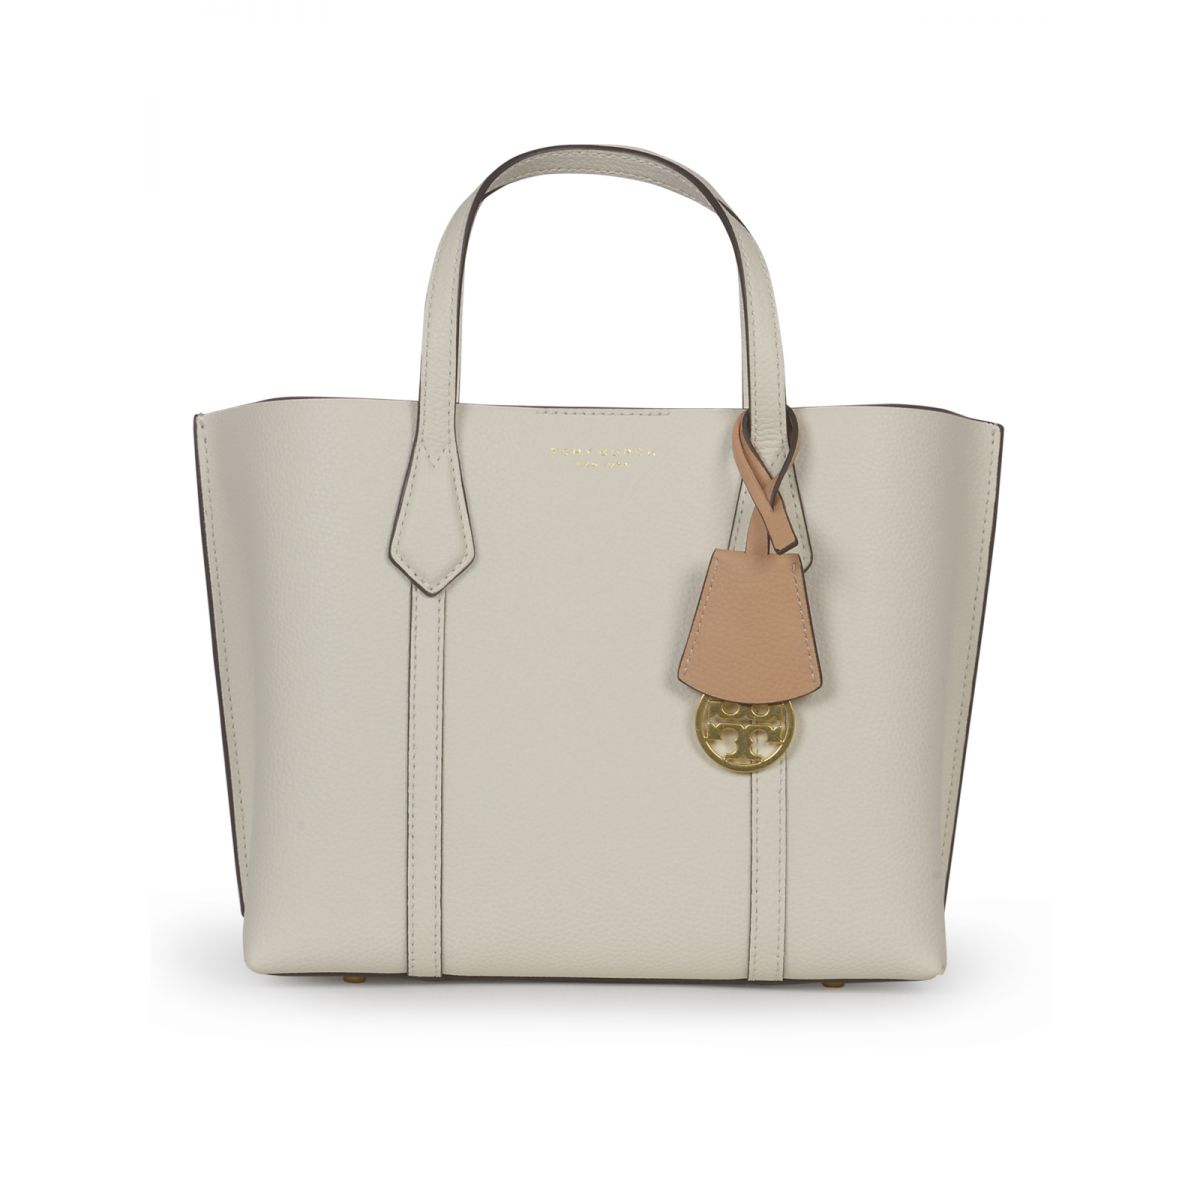 TORY BURCH - Small perry triple-compartment tote bag